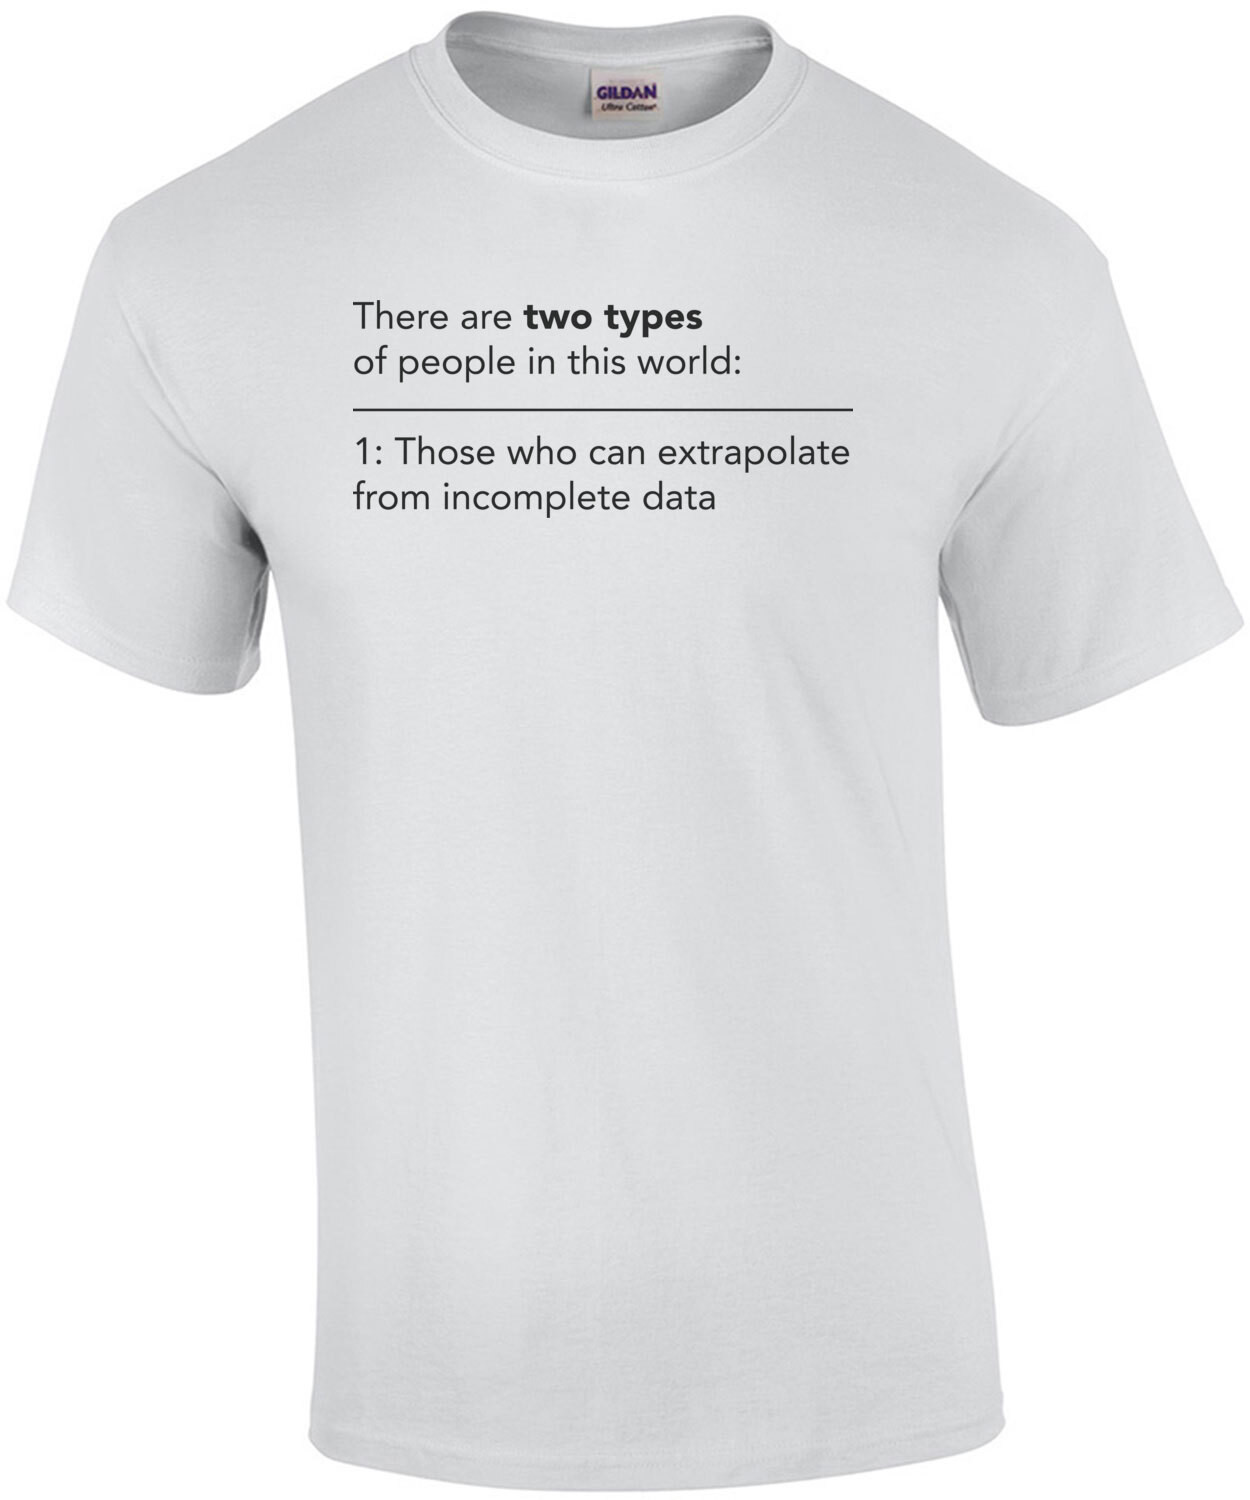 There are two types of people in this world. Those who can extrapulate from incomplete data - funny sarcastic t-shirt